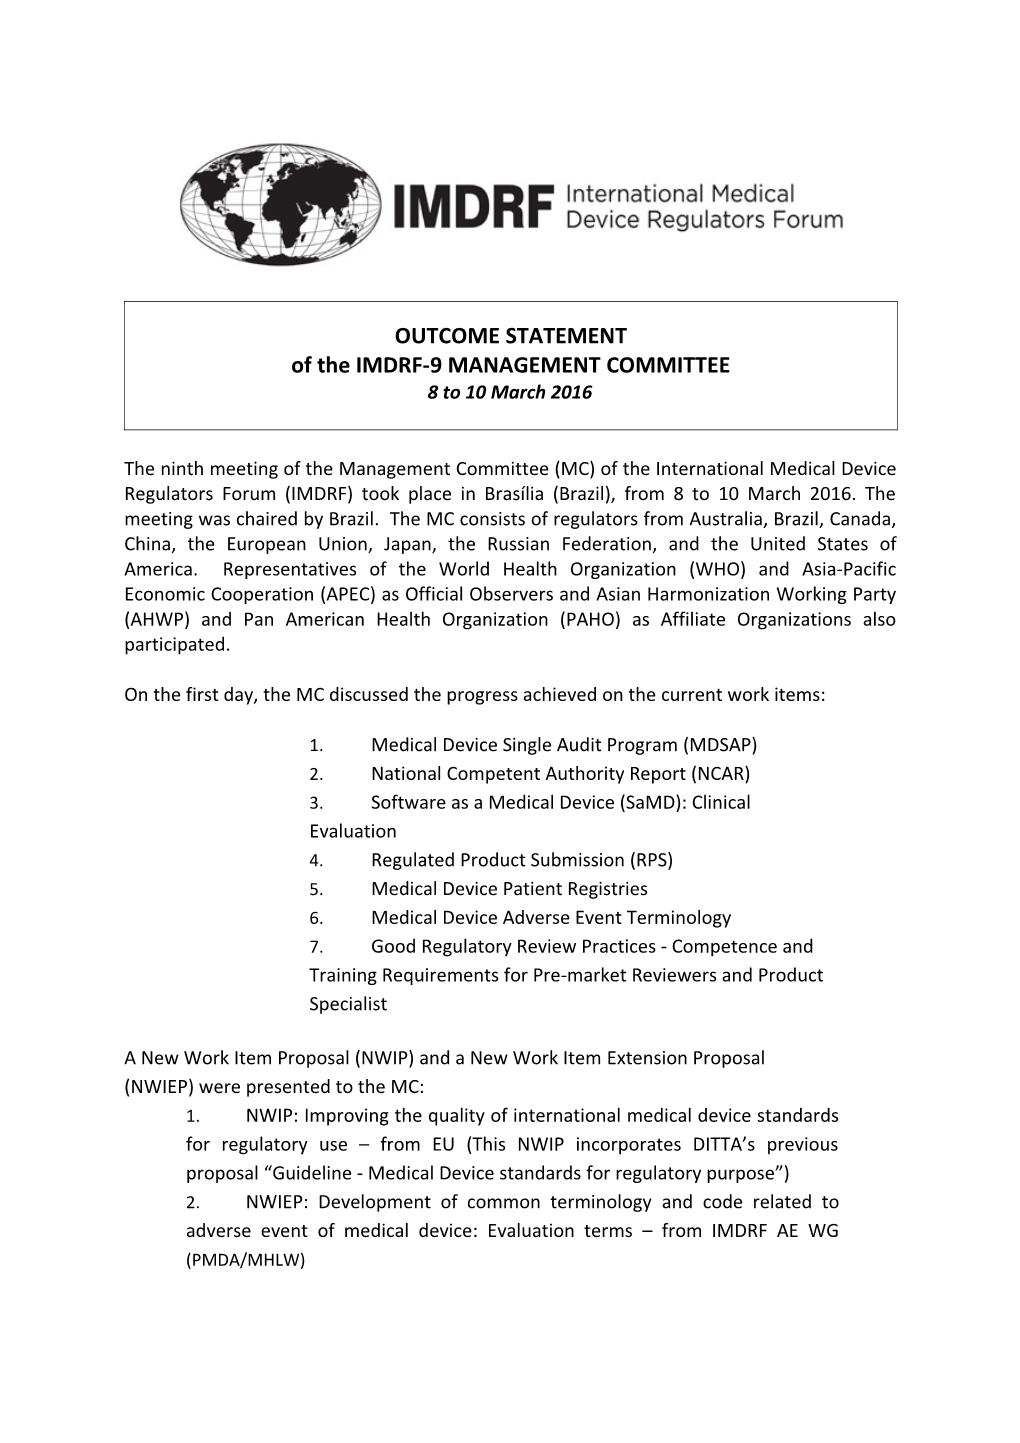 IMDRF Outcome Statement of the IMDRF-9 Management Committee 8-10 March 2016